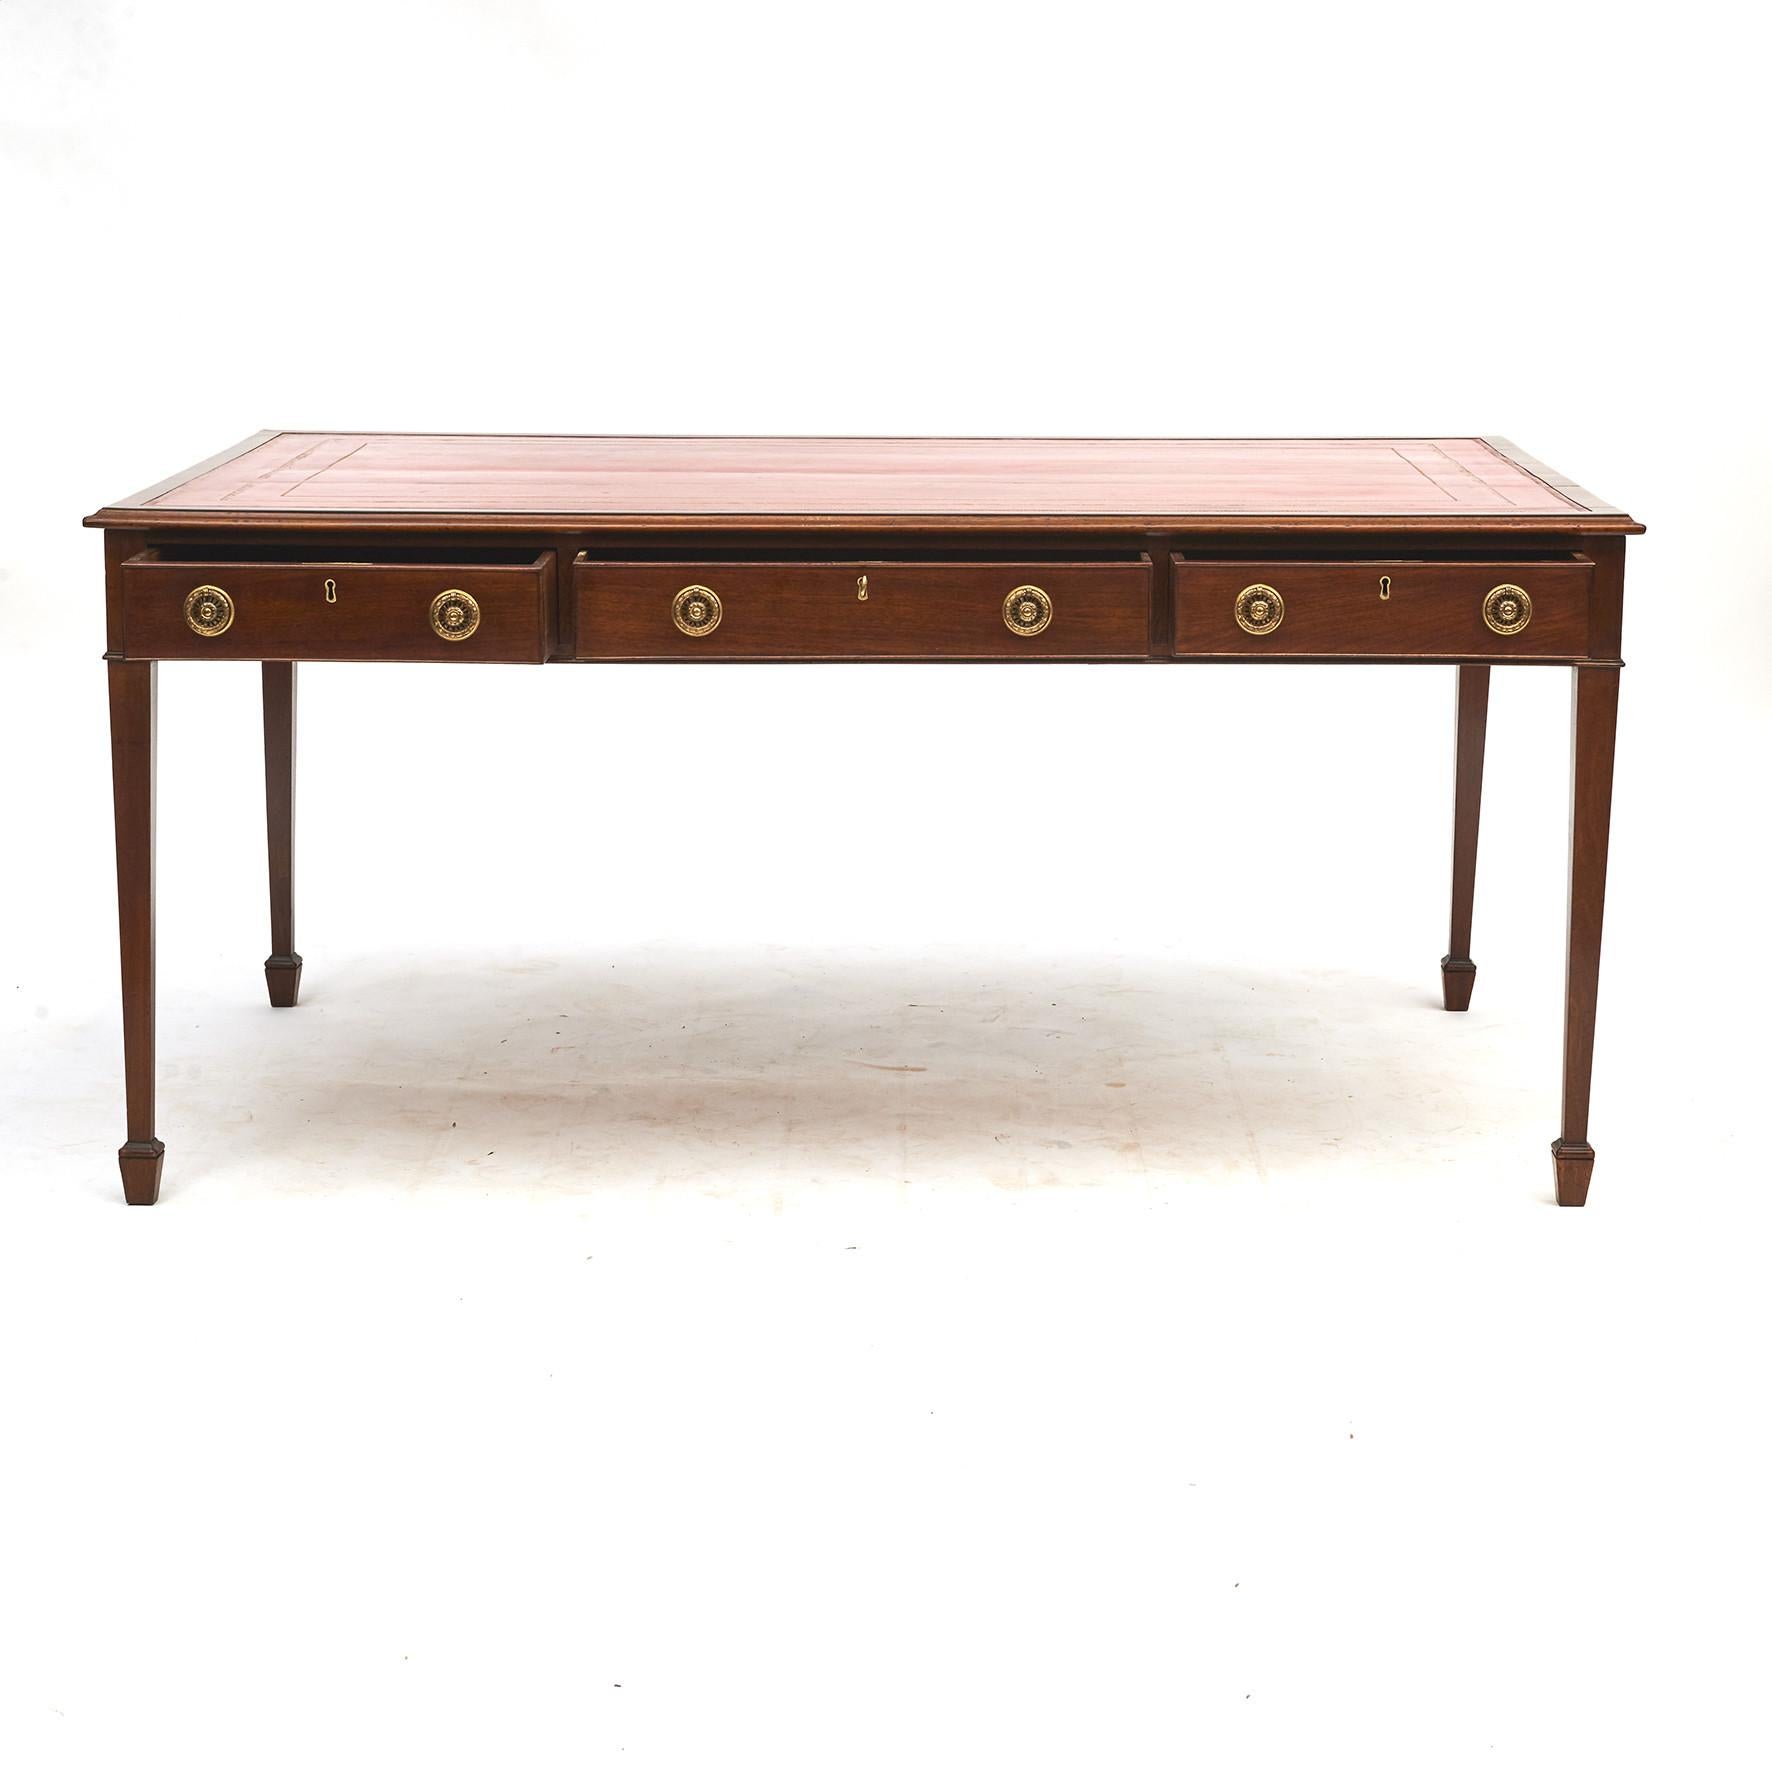 Regency partners desk.
Mahogany frame with a rouge leather and gilded trim top, three drawers on each side standing on tapered legs ending in spade foot.
England, 1820-1830.
Newly polished, leather with beautiful patina consistent with age and